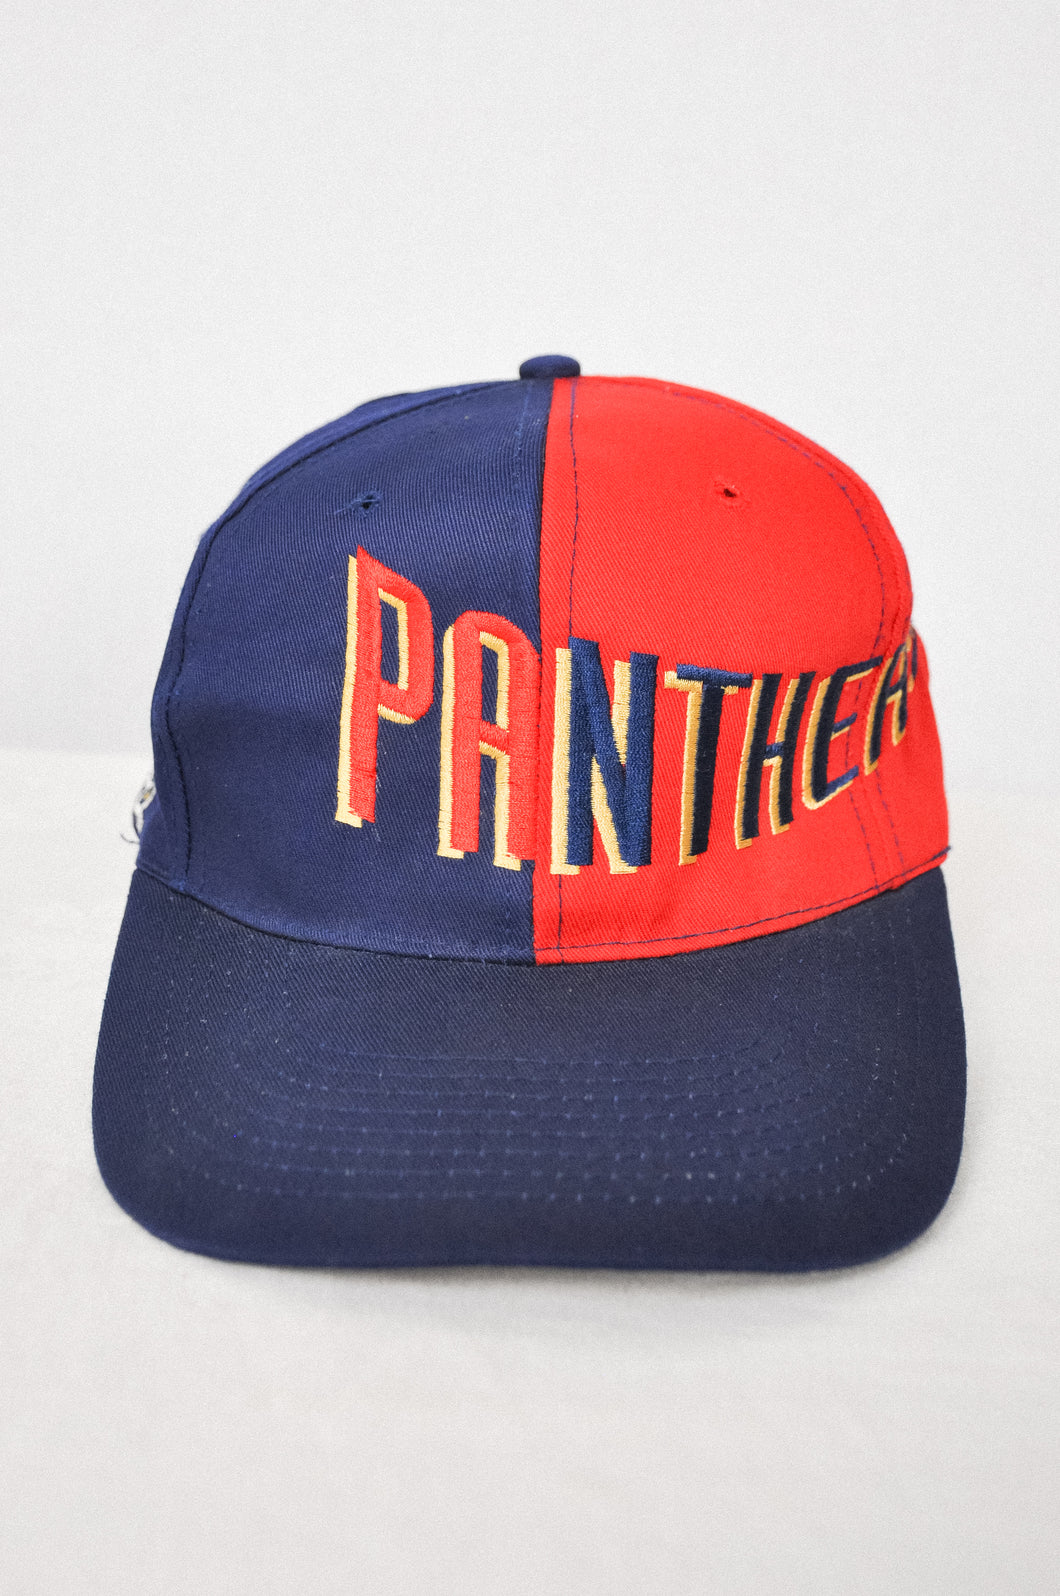 Vintage Florida Panthers Spell-Out Snapback Hat